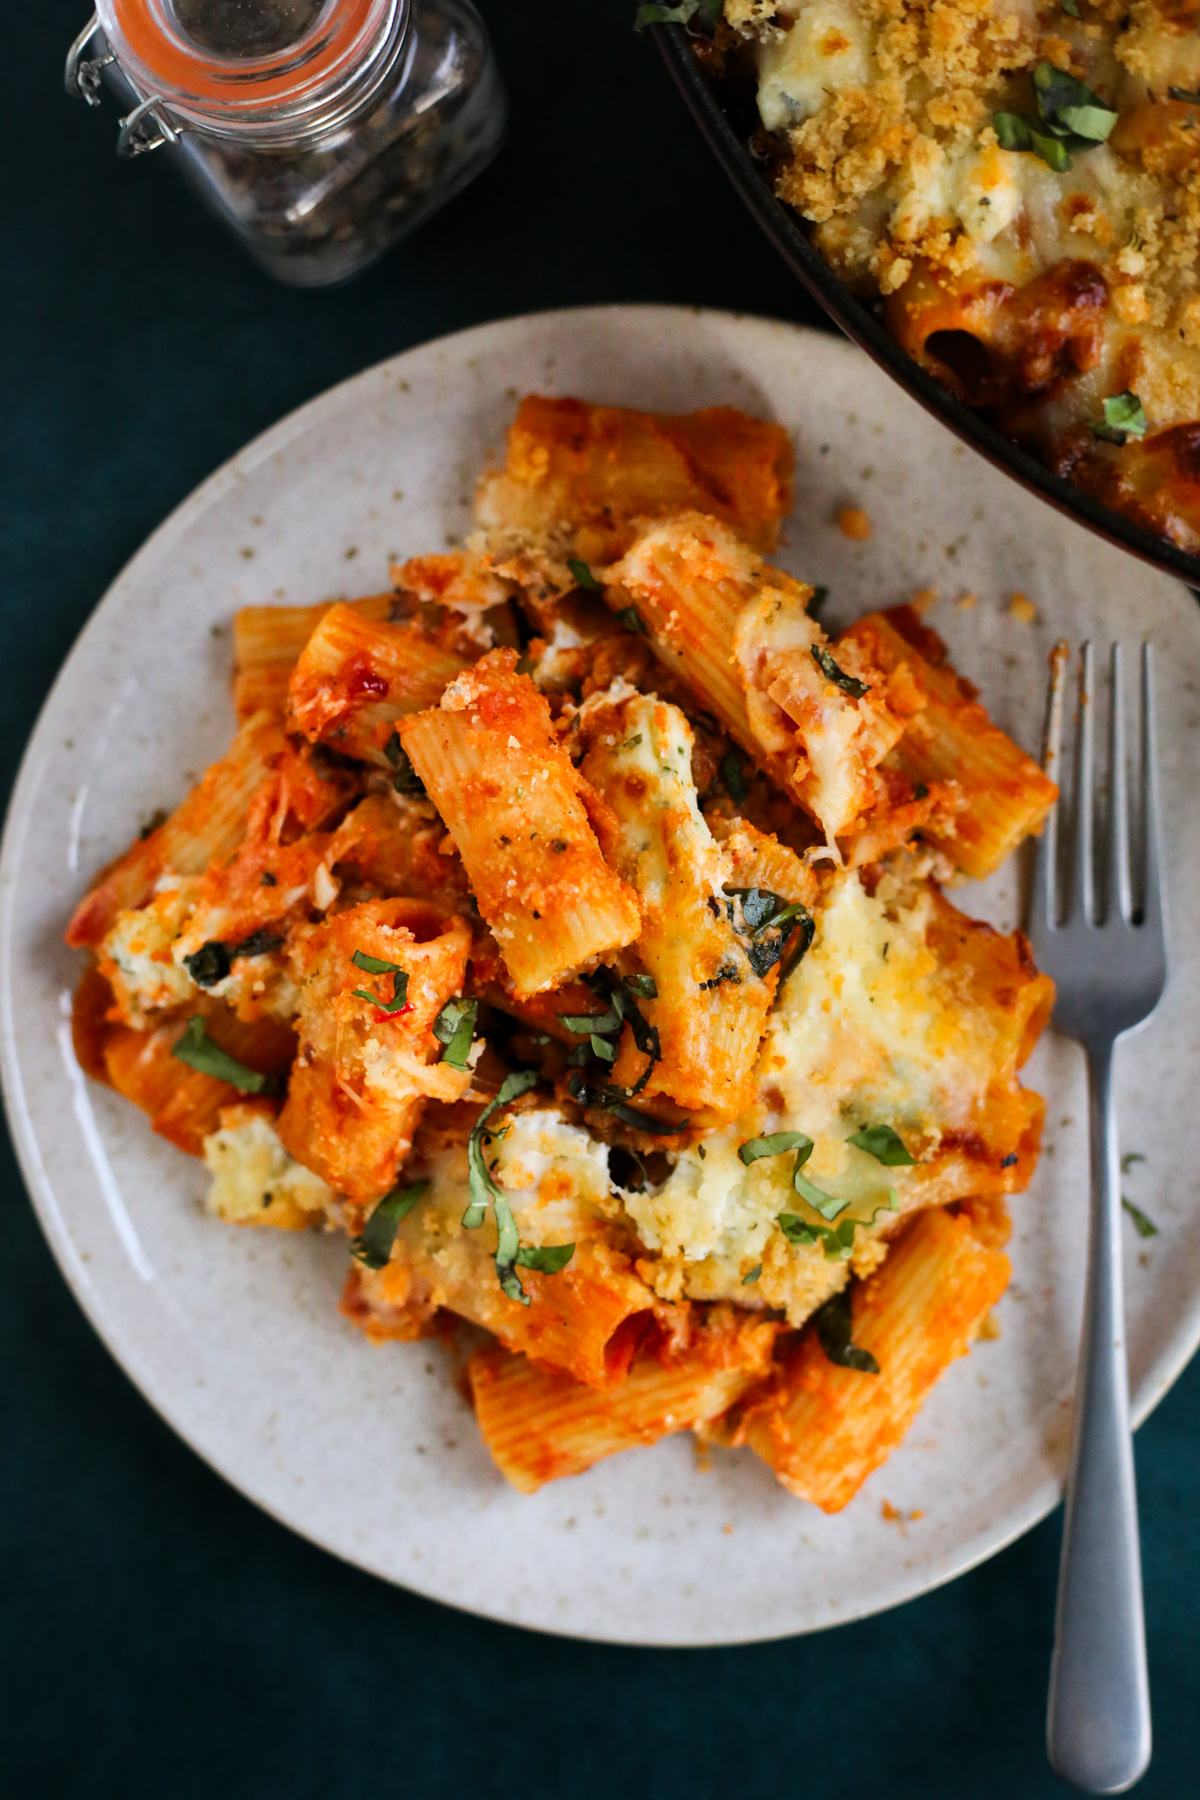 Overhead view of a dinner plate serving a baked rigatoni recipe that's garnished with melty cheese, breadcrumbs, and fresh basil, with everything coated in a rich tomato sauce and a silver spoon resting on the right side of the dinner plate